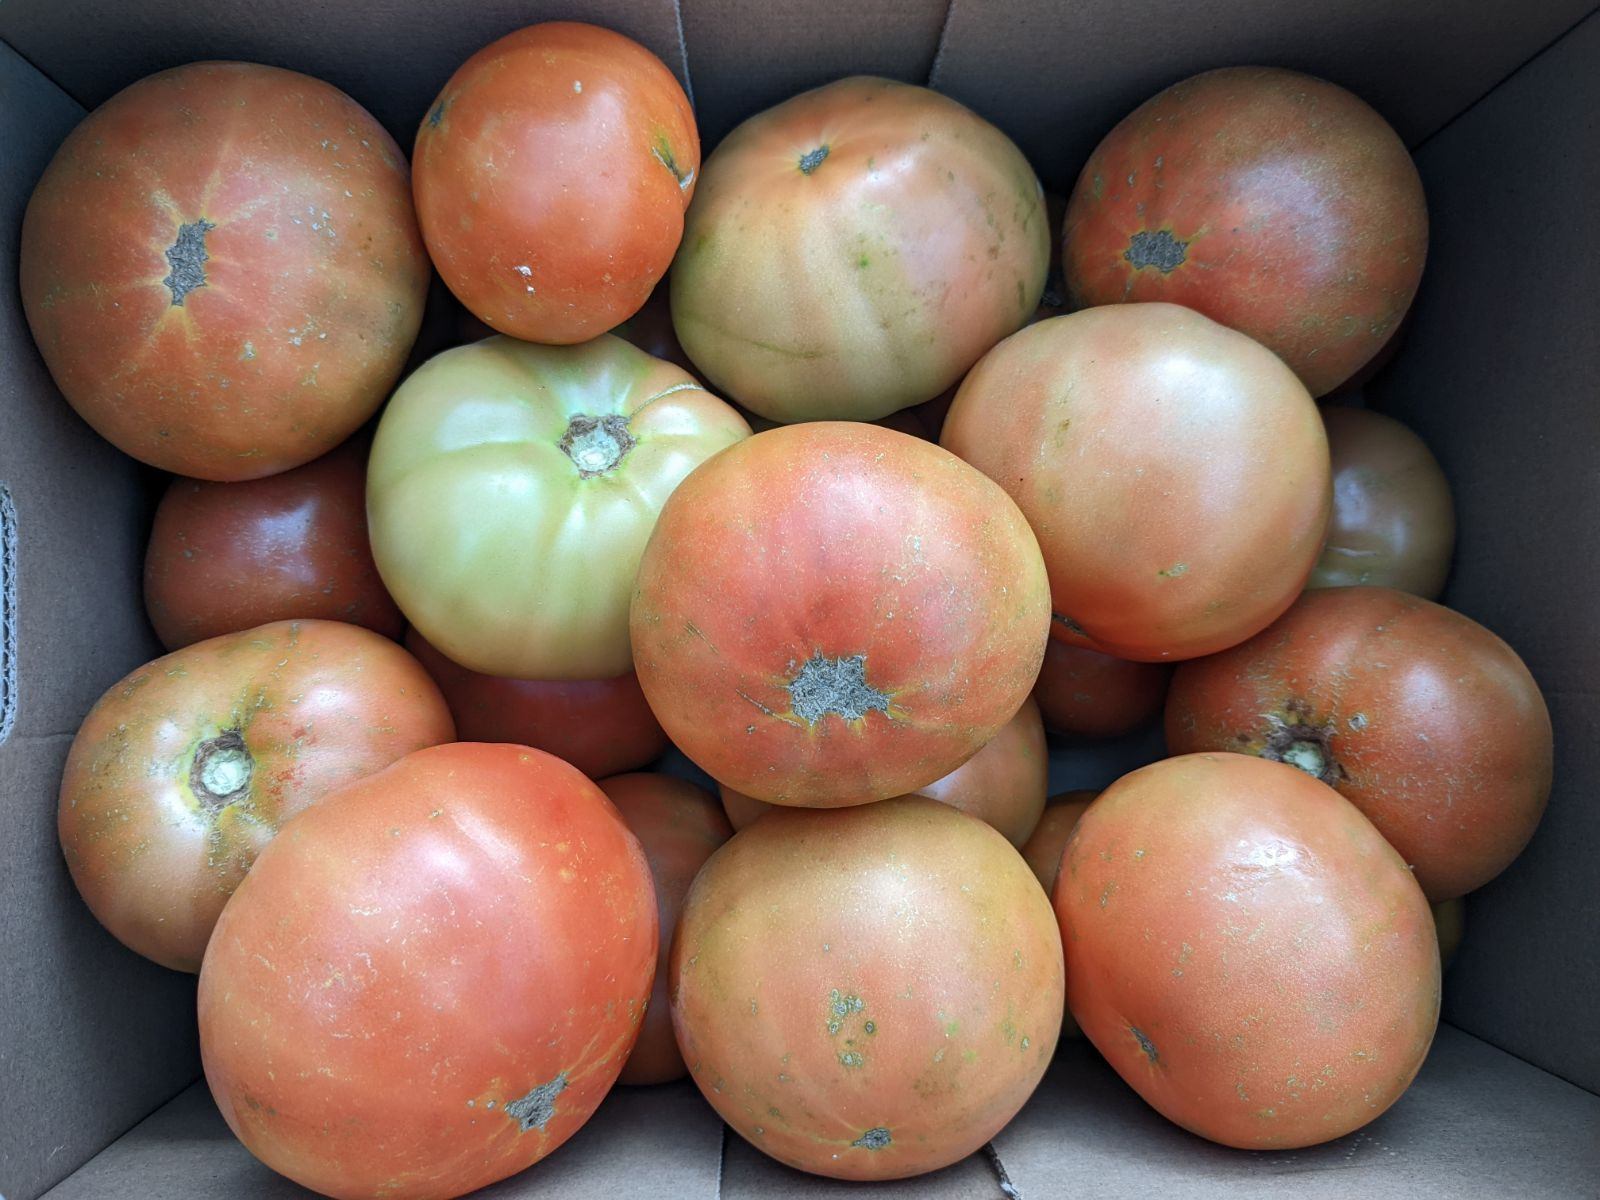 20lb Box of Imperfect Tomatoes